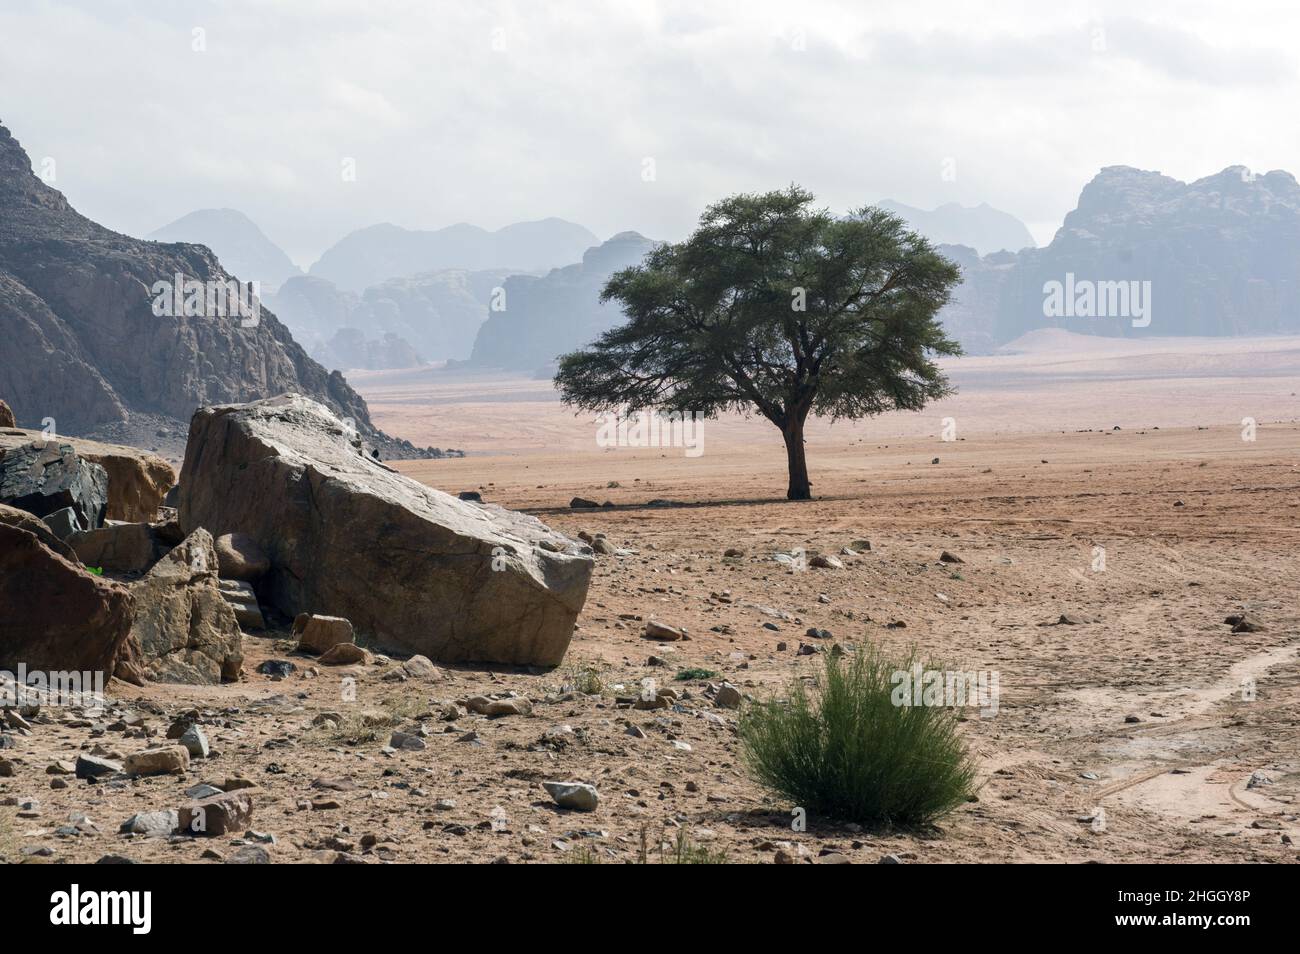 A lone tree stands in the desert landscape of Wadi Rum, a canyon in Jordan with red sands and cliff walls. Stock Photo